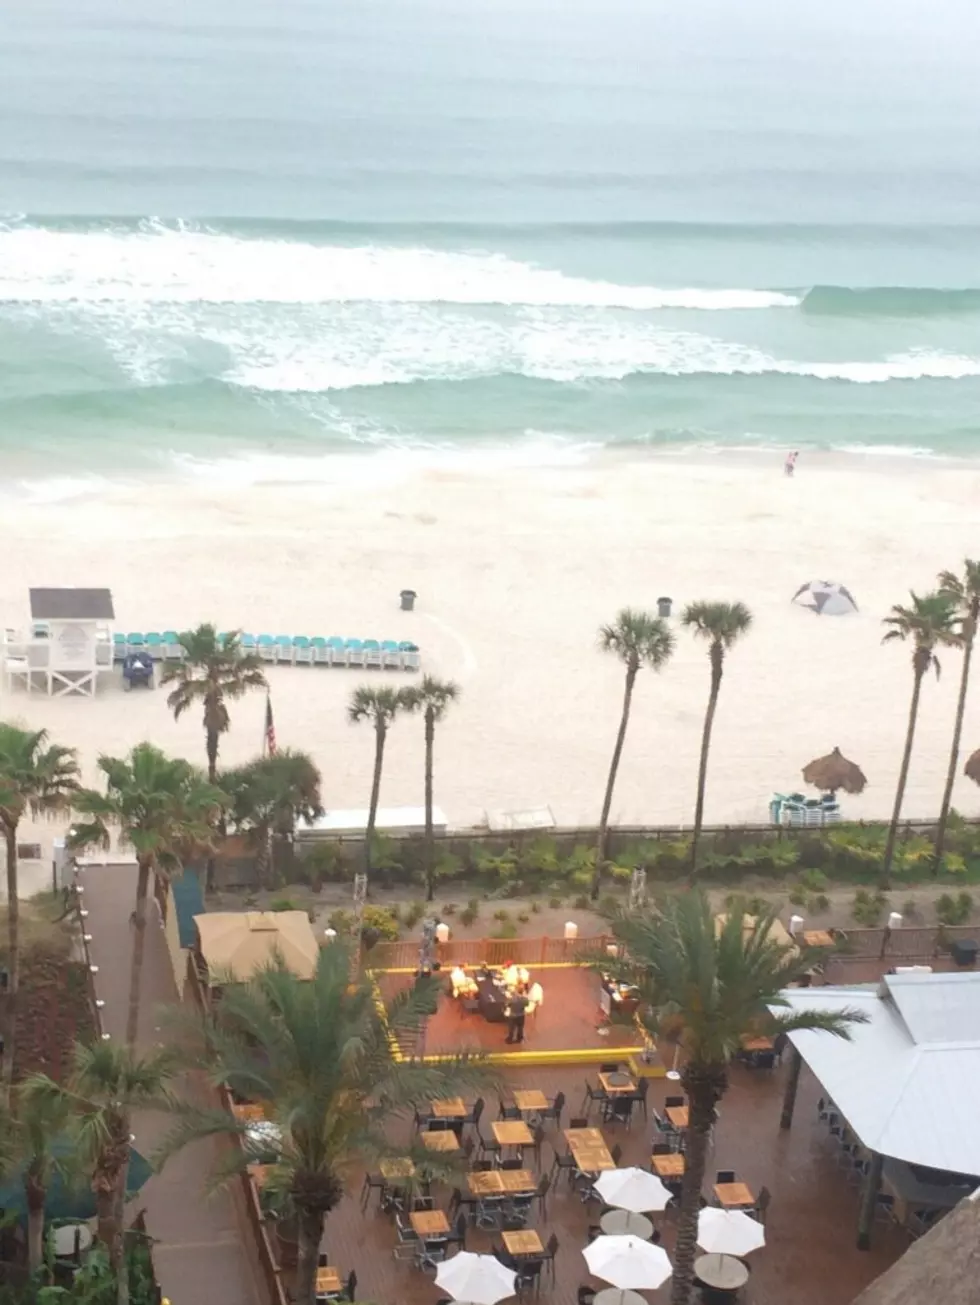 Check Out the View From the Holiday Inn Resort in Panama City Beach Florida!